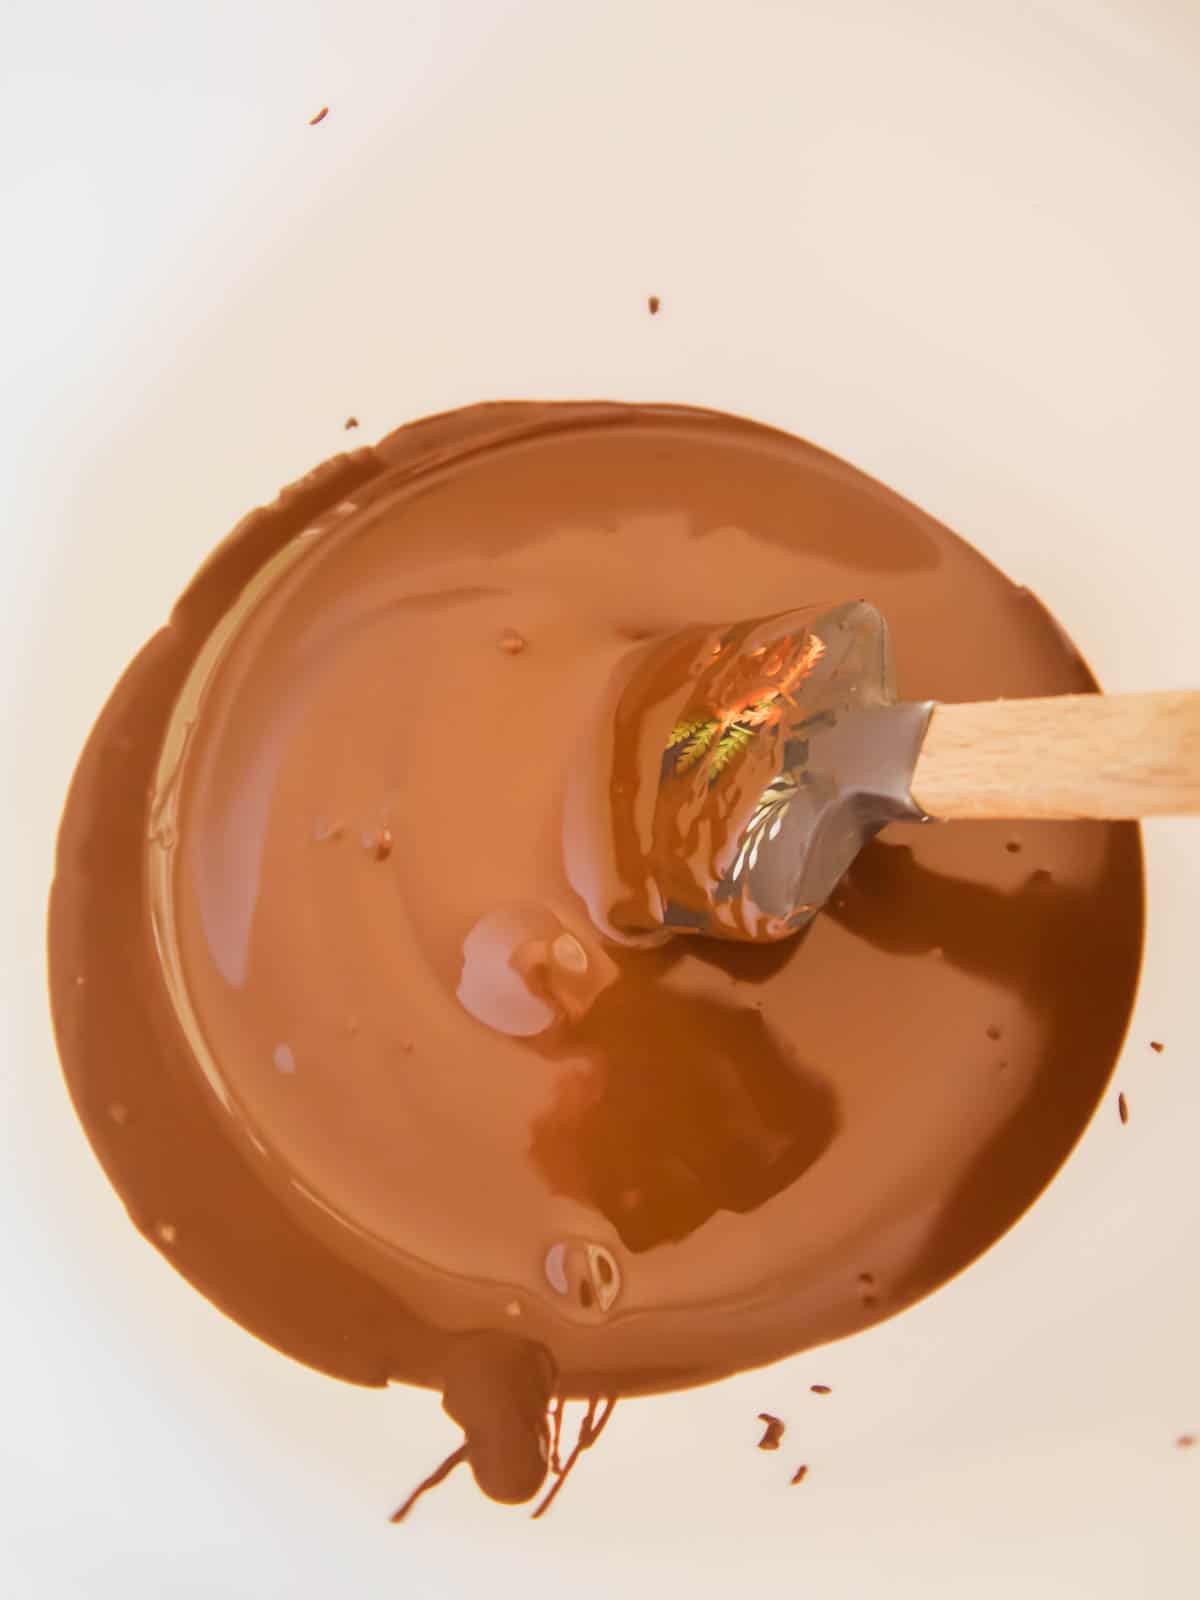 Melted chocolate in a pan.